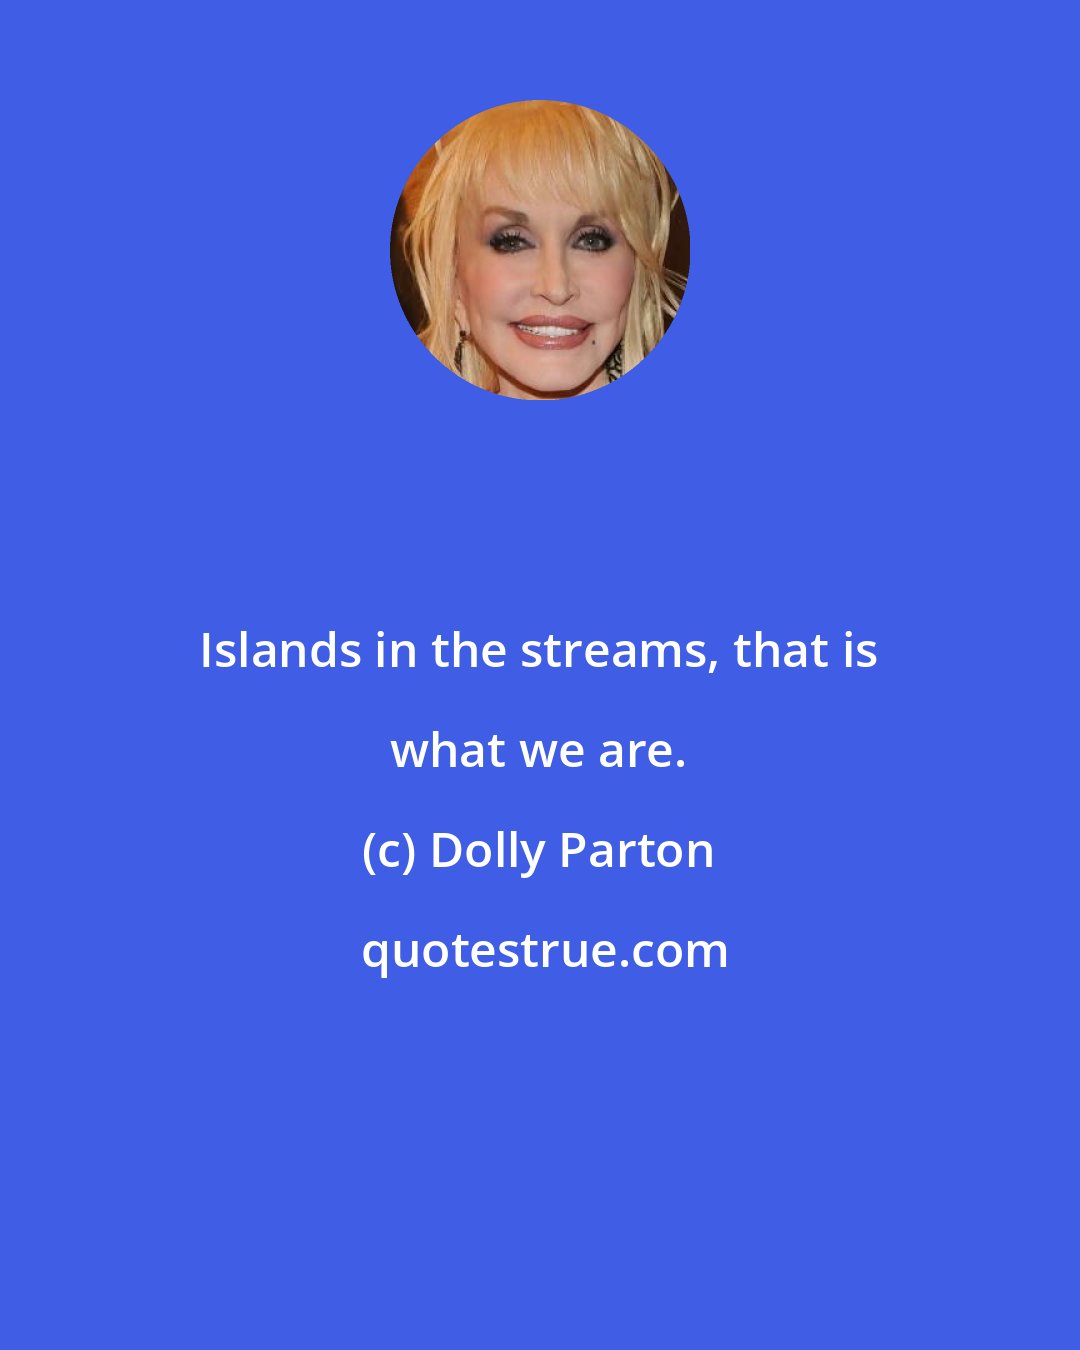 Dolly Parton: Islands in the streams, that is what we are.